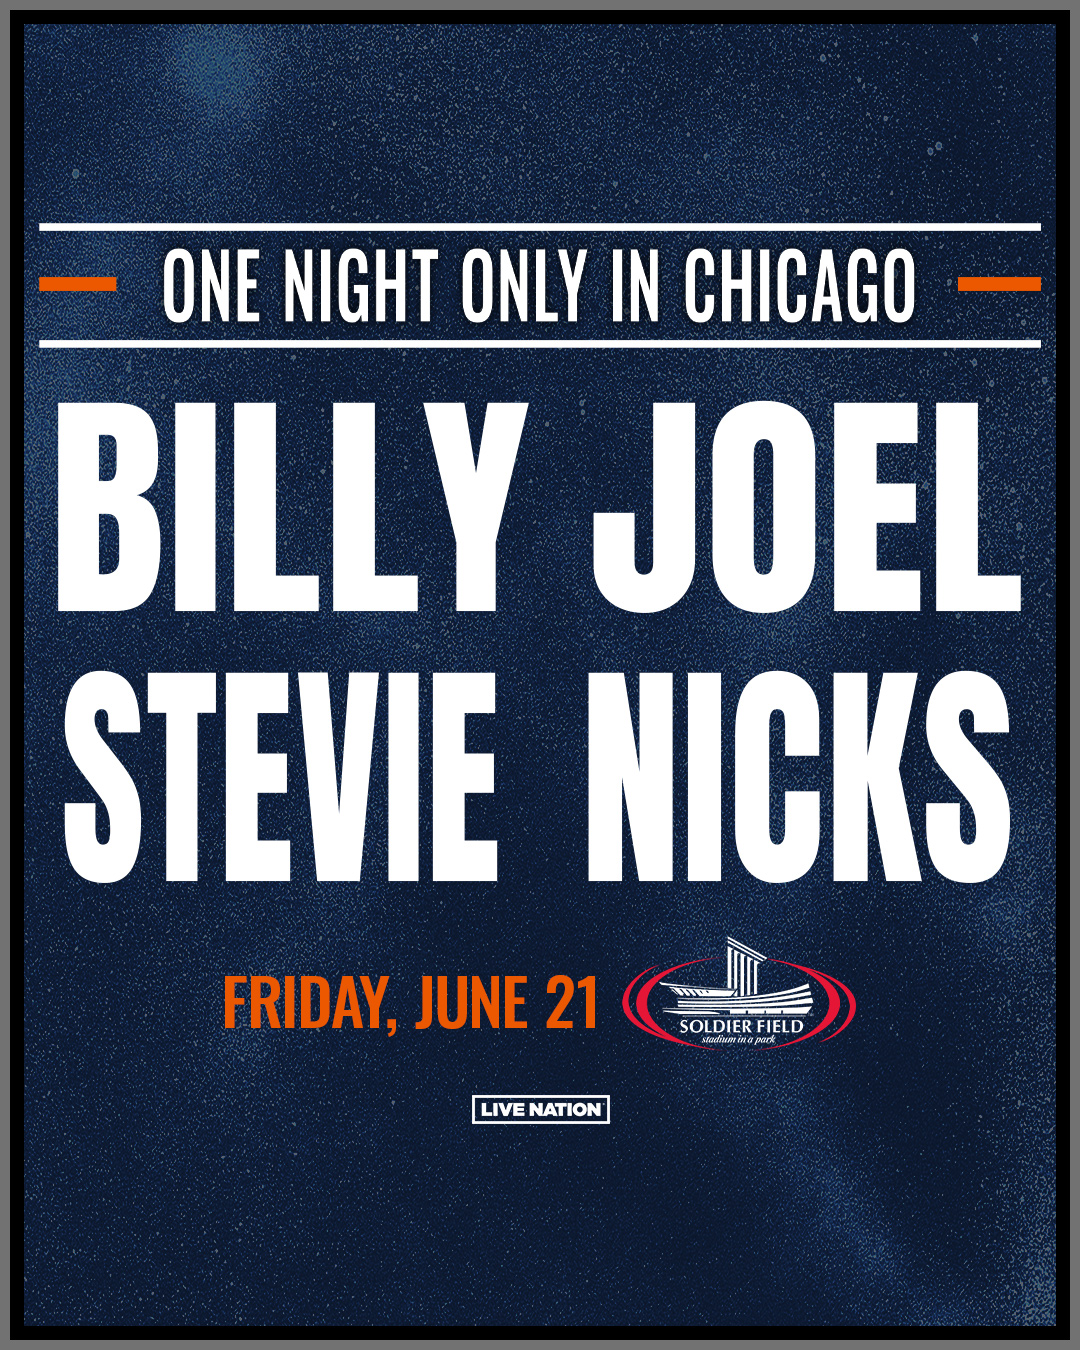 Andrea from Racine won Billy Joel and Stevie Nicks tickets!